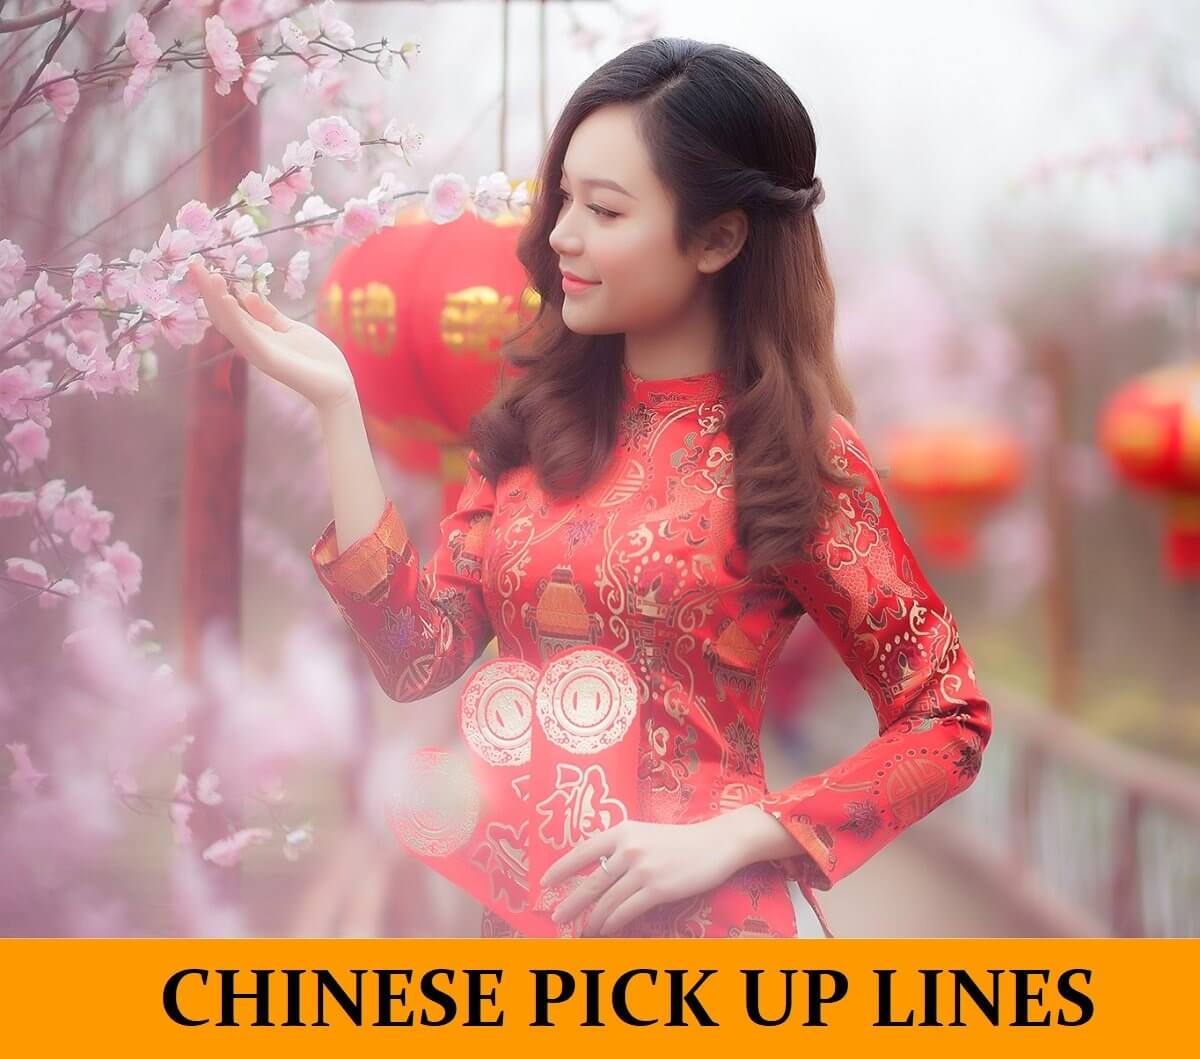 Pick Up Lines About Chinese